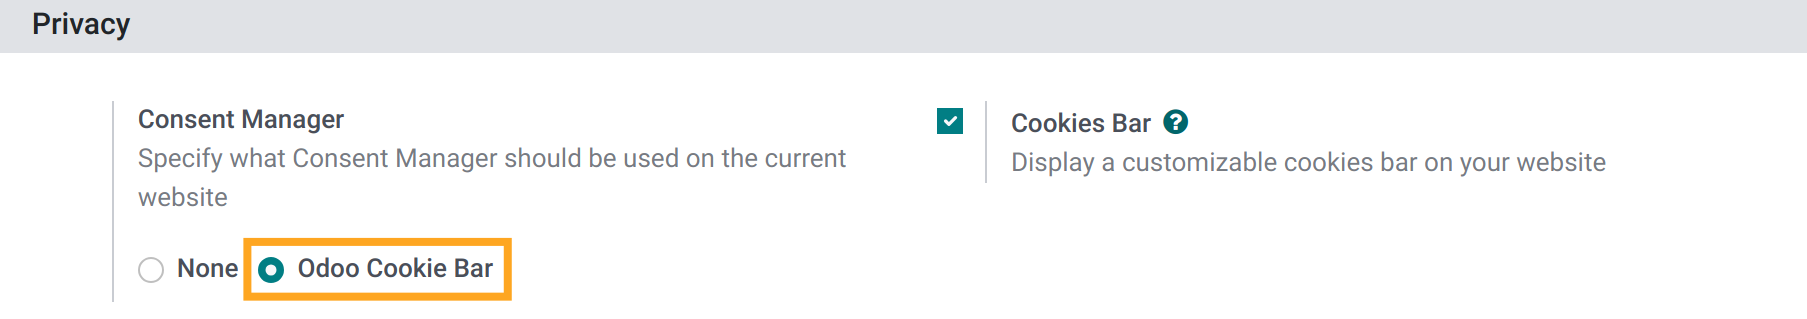 Odoo Consent Manager Cookie Bar 16.0